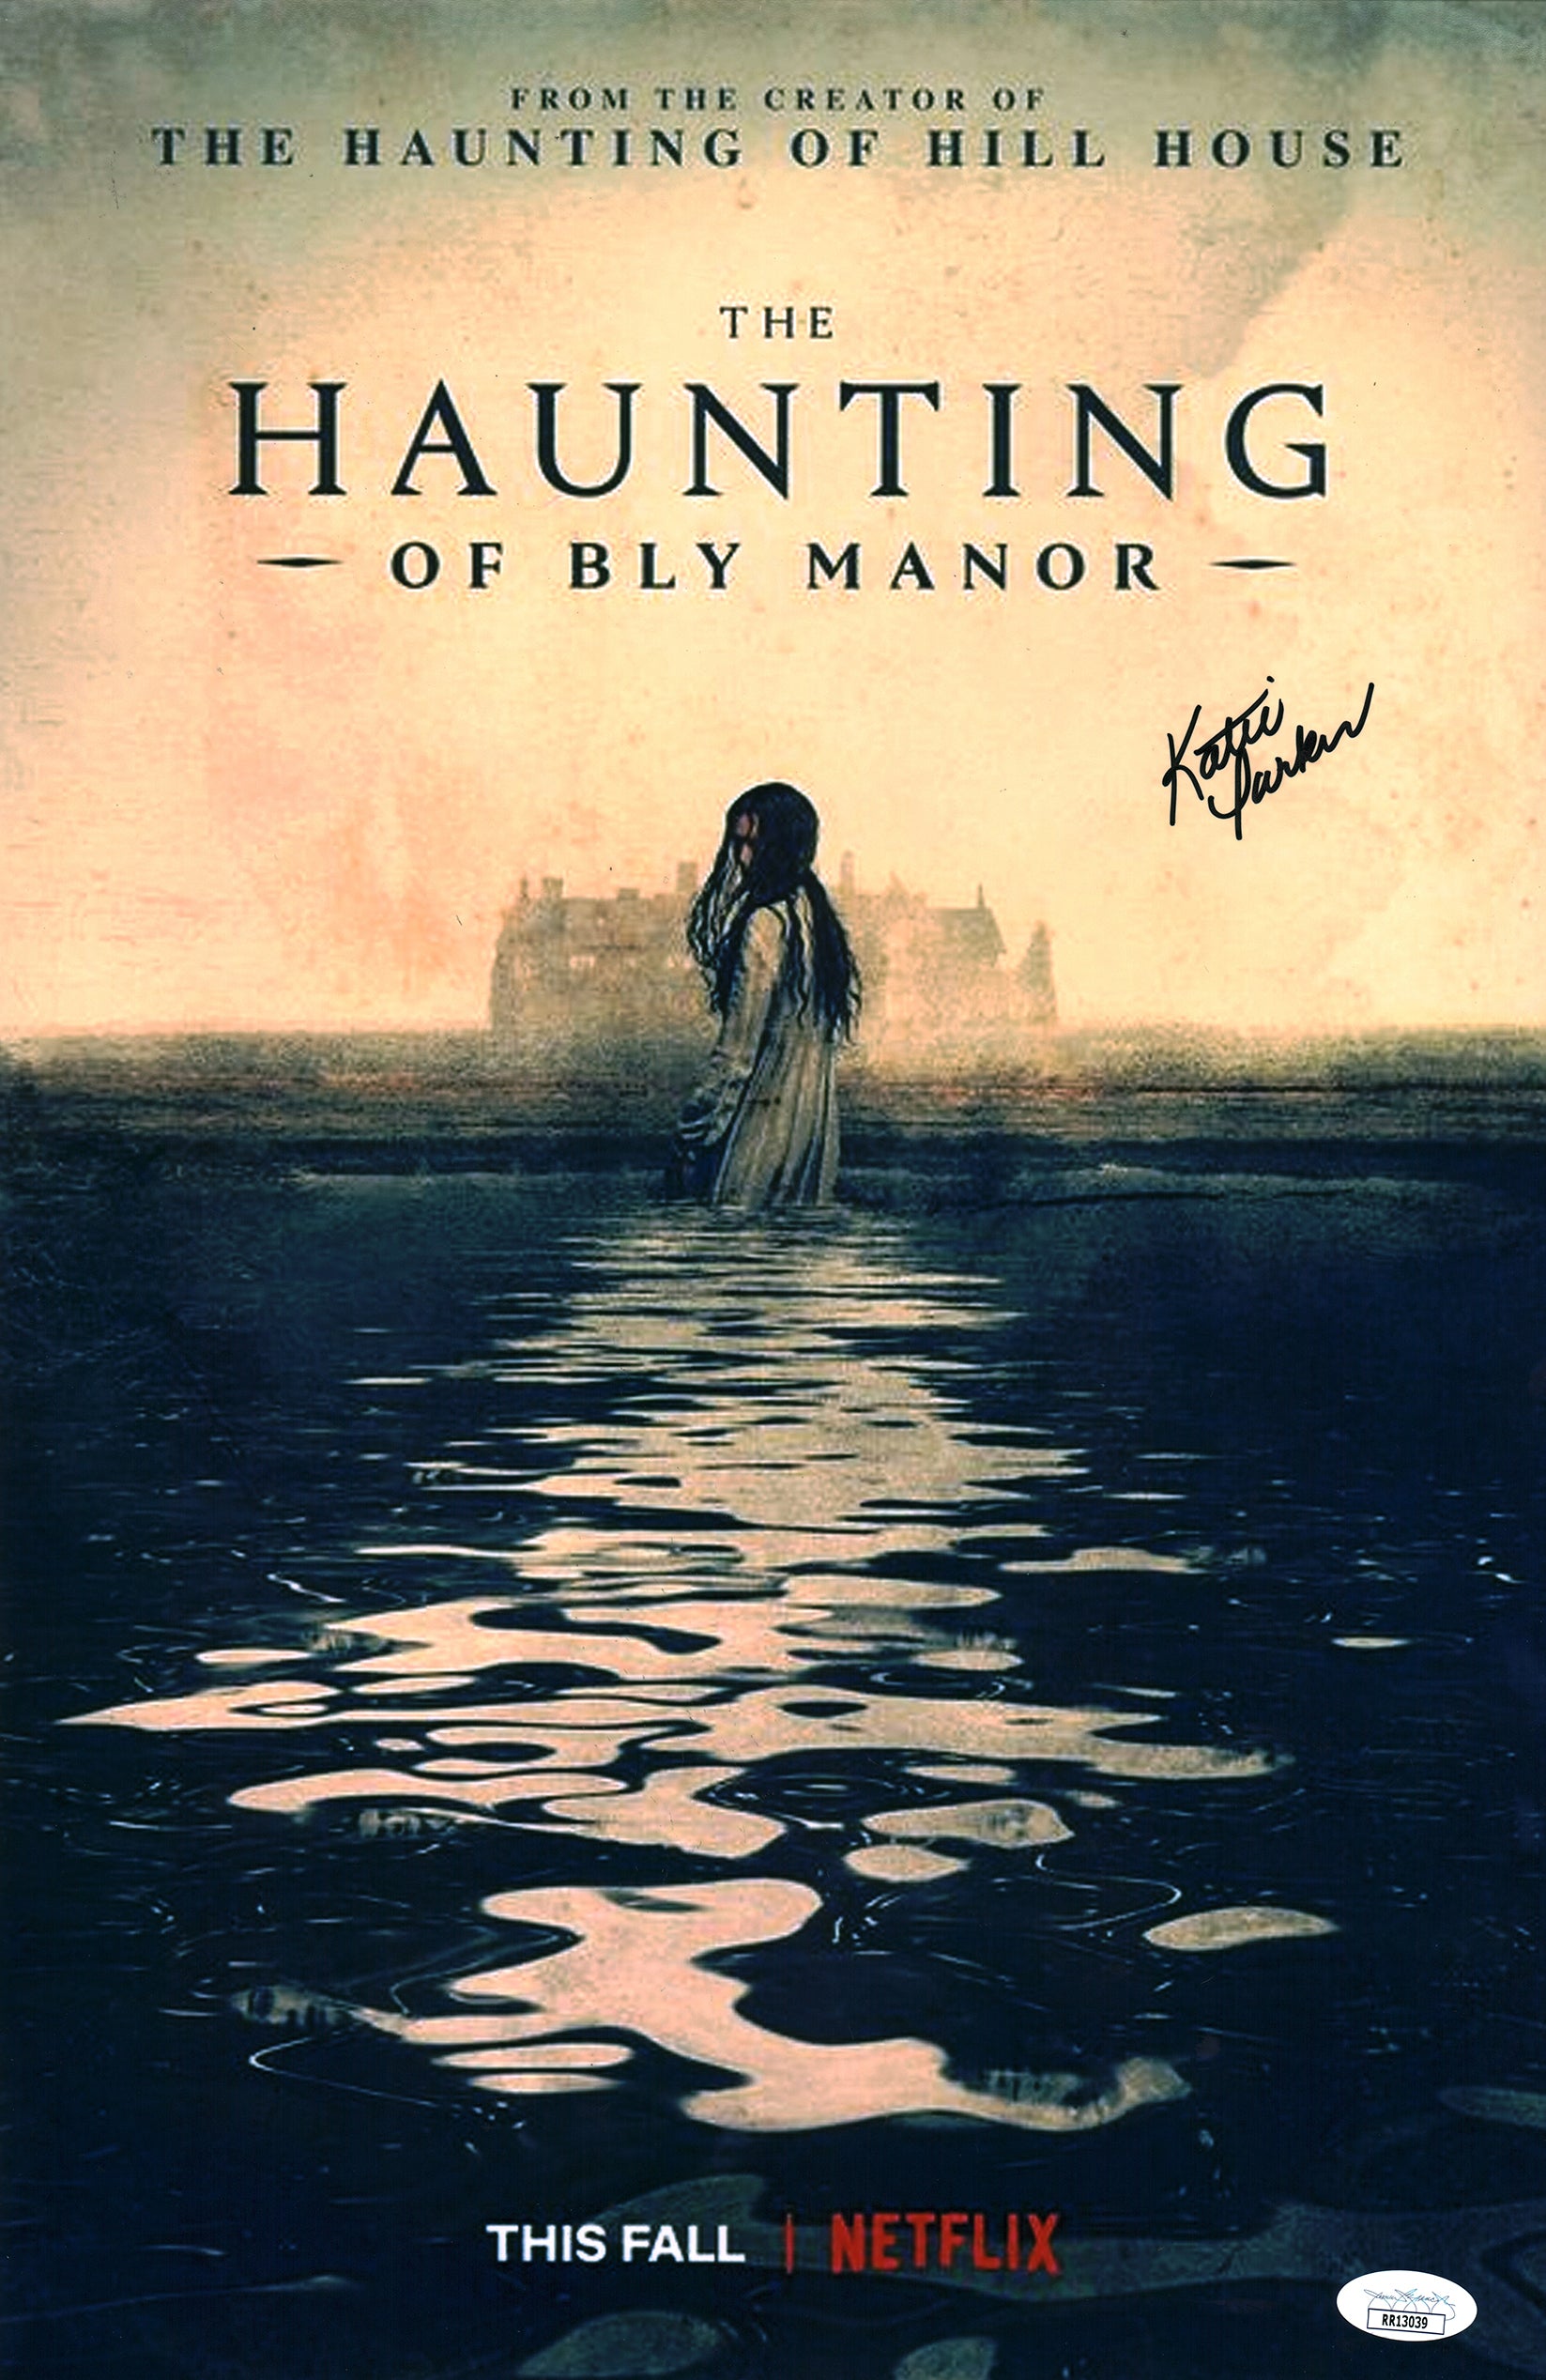 Katie Parker The Haunting of Bly Manor 11x17 Mini Poster Signed JSA Certified Autograph